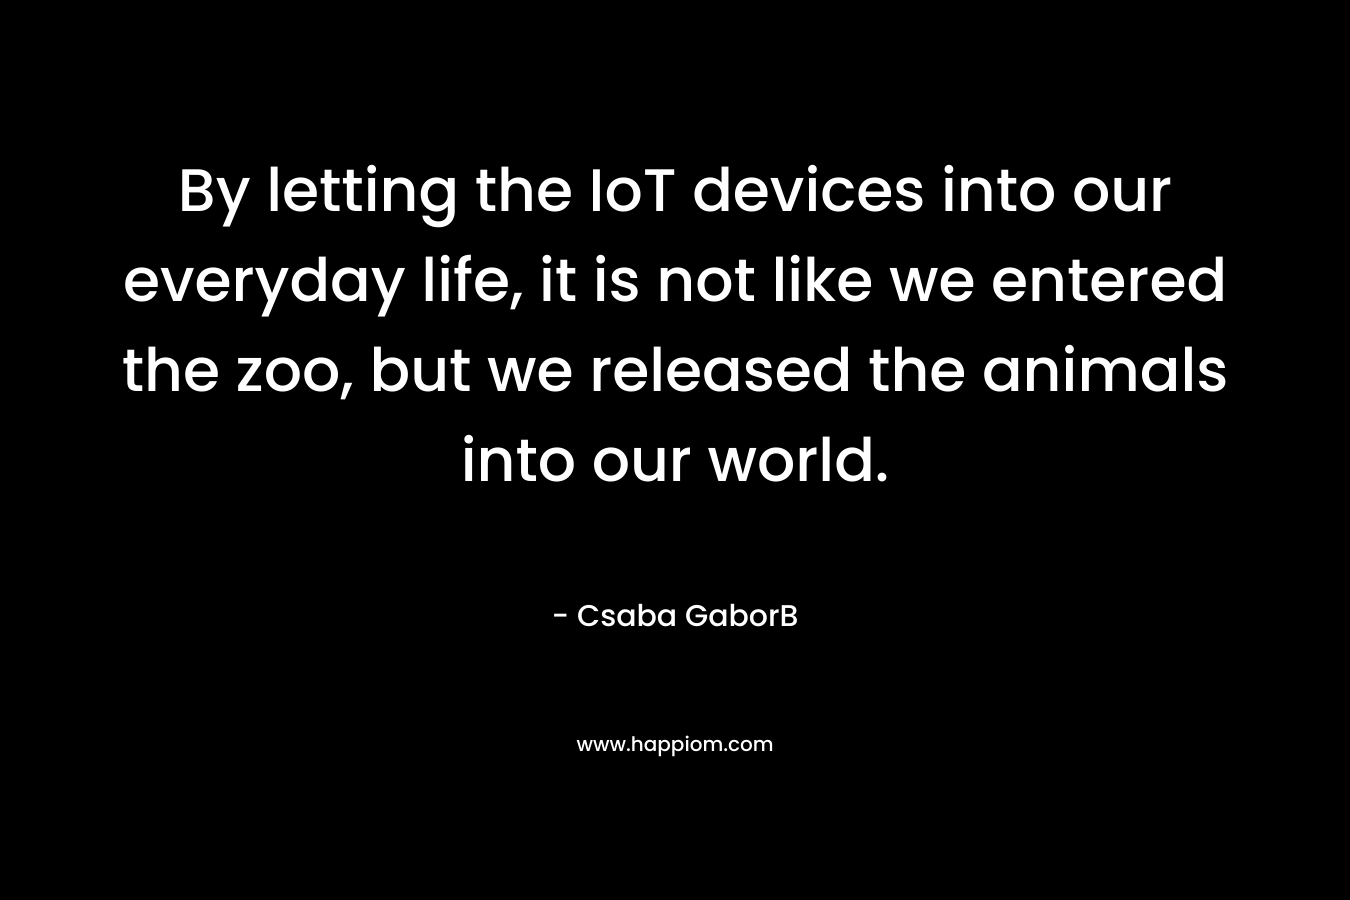 By letting the IoT devices into our everyday life, it is not like we entered the zoo, but we released the animals into our world.